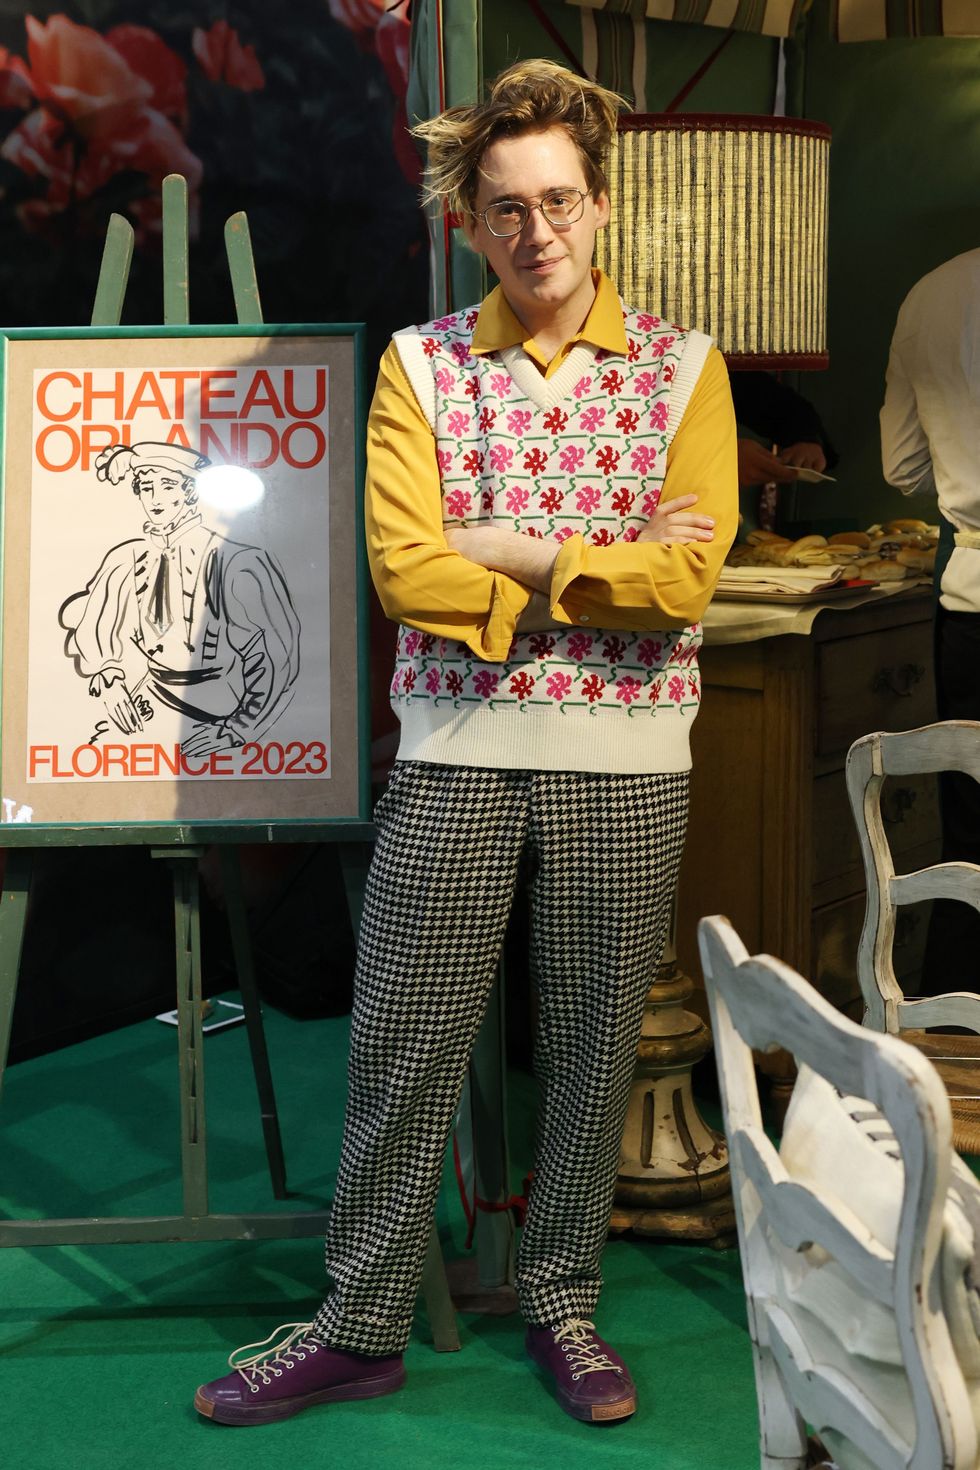 florence, italy january 11 designer luke edward hall attends chateau orlando event during pitti immagine uomo 103 at fortezza da basso on january 11, 2023 in florence, italy photo by stefania m dalessandrogetty images